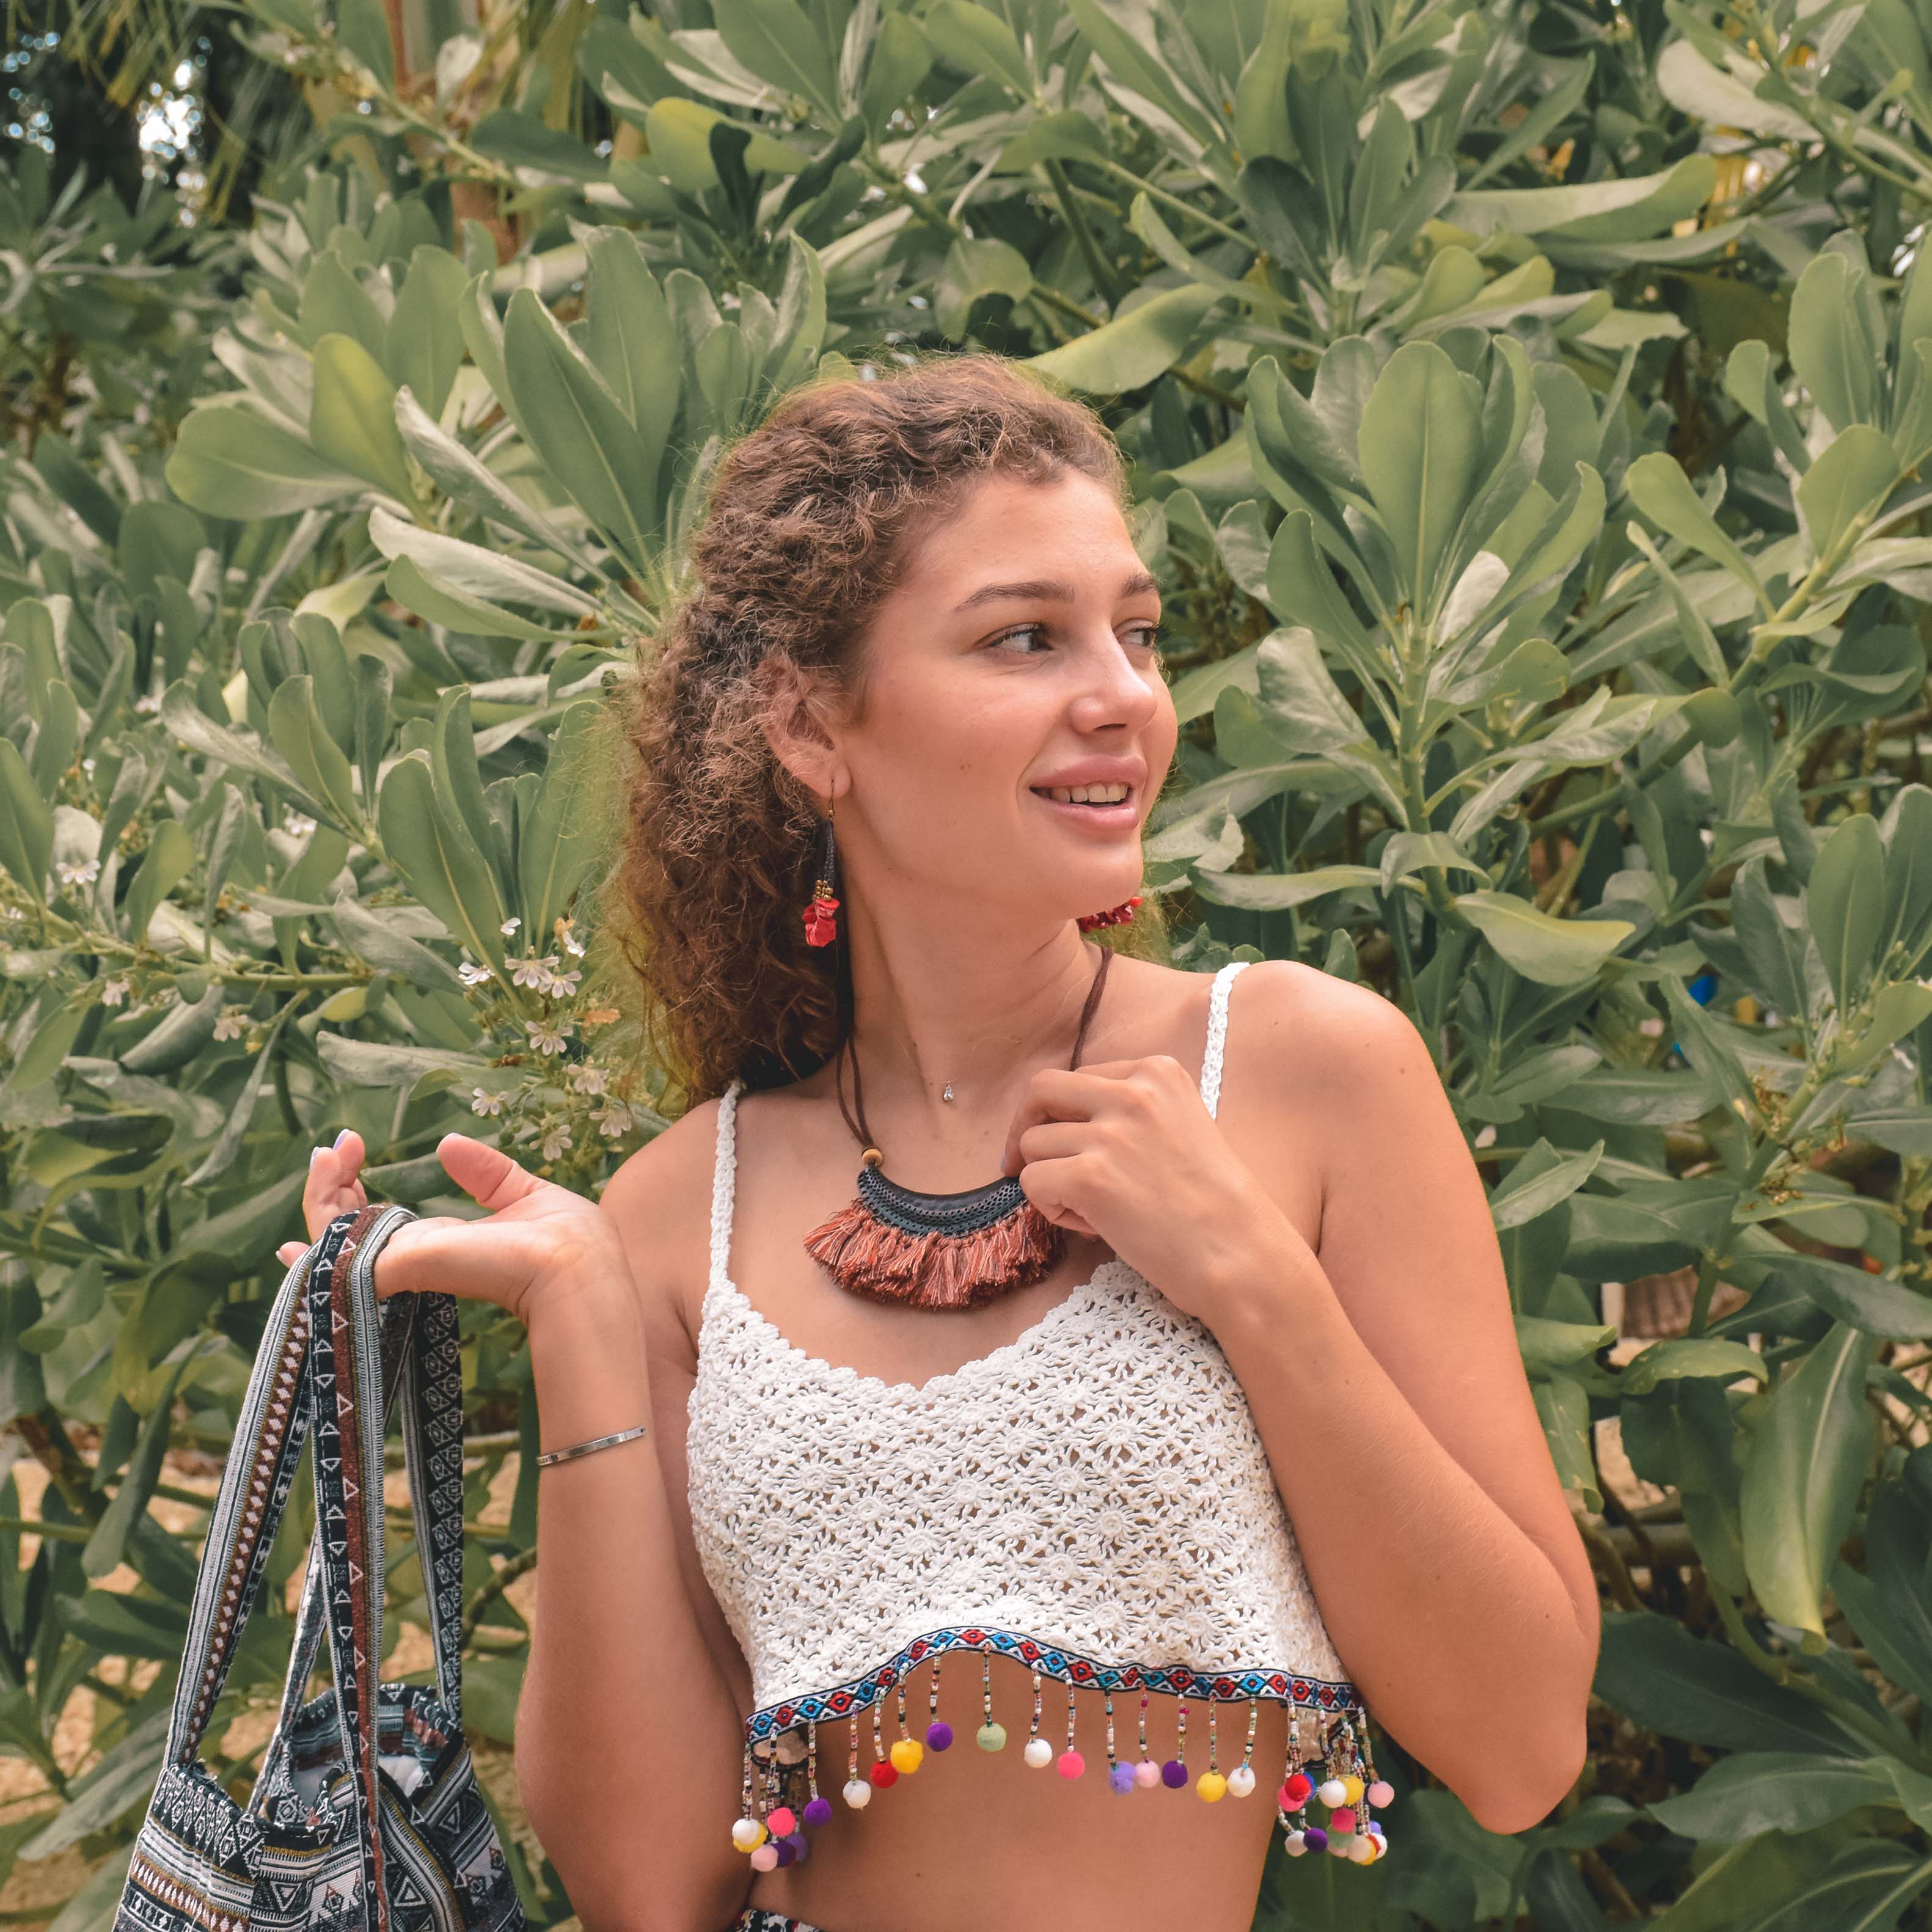 SAMUI NECKLACE Elepanta Necklaces - Buy Today Elephant Pants Jewelry And Bohemian Clothes Handmade In Thailand Help To Save The Elephants FairTrade And Vegan